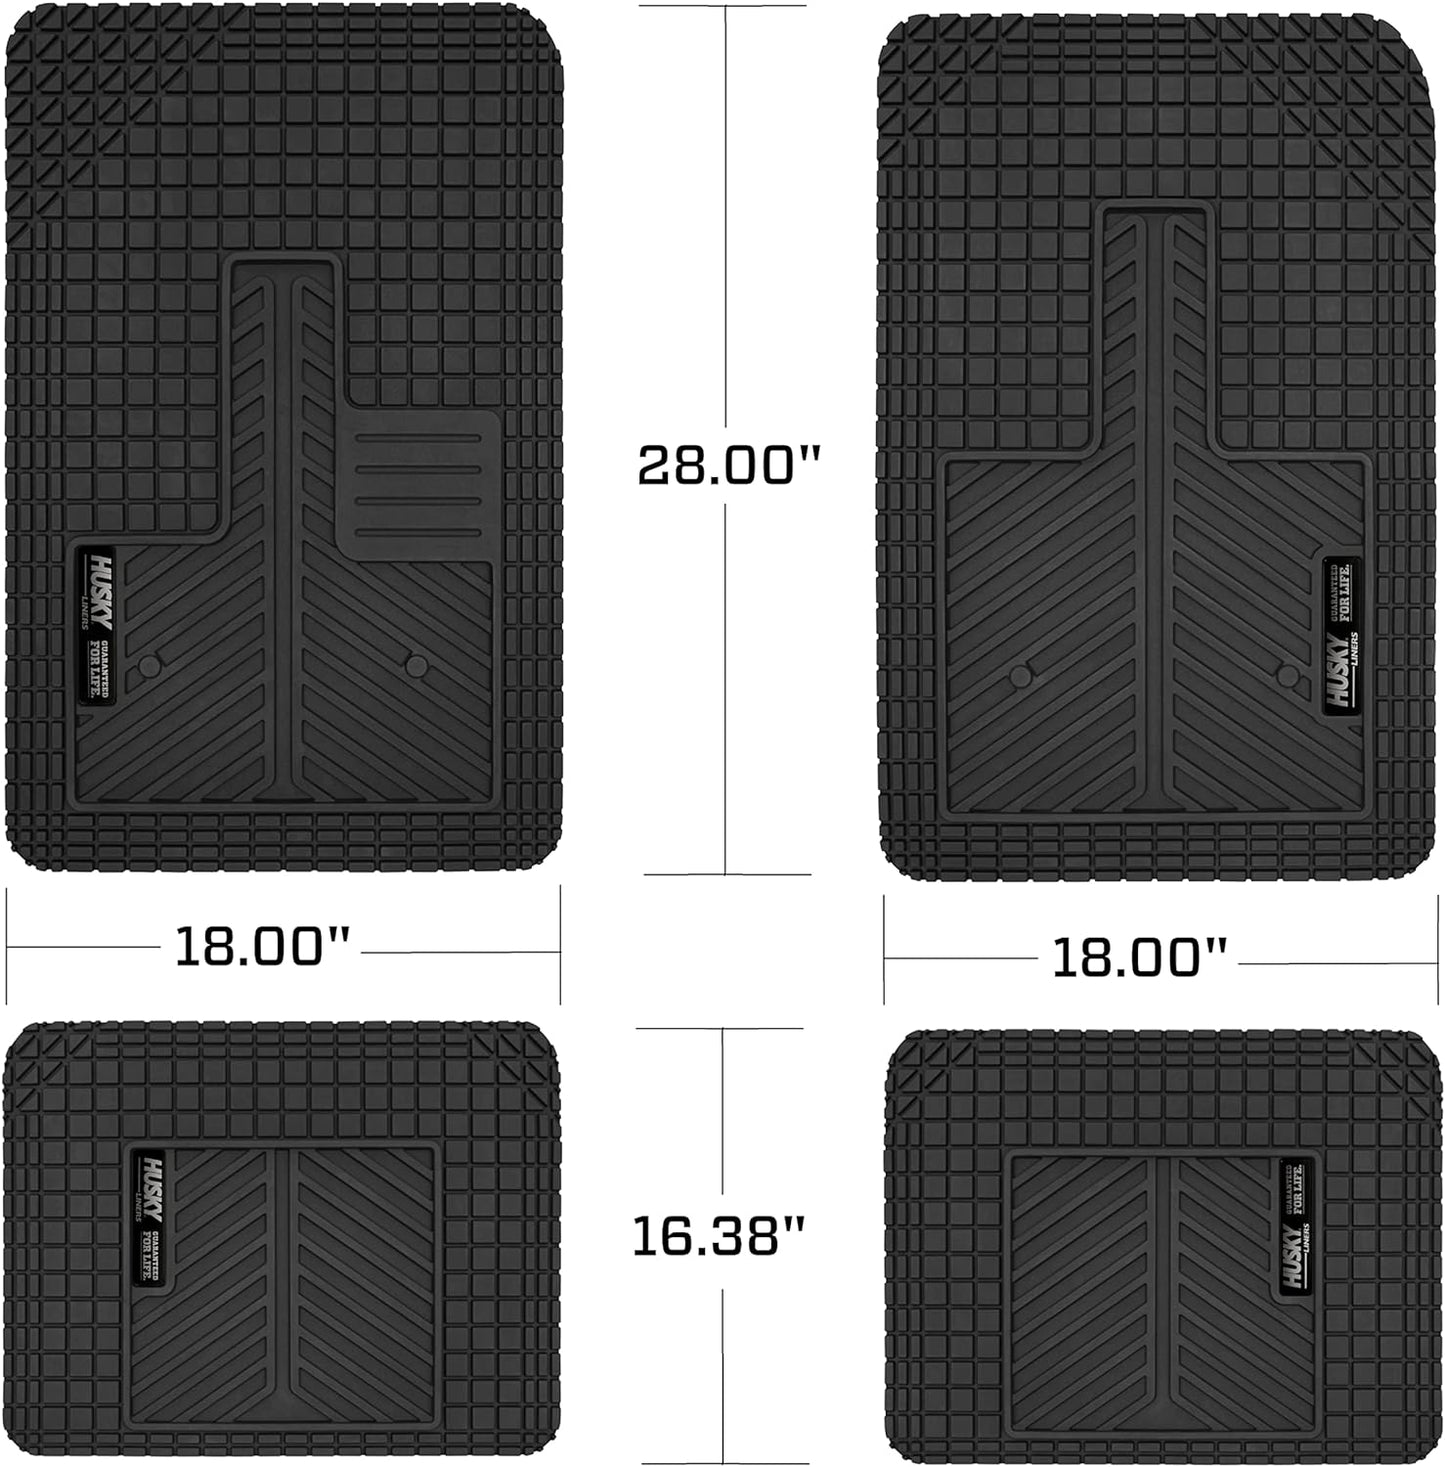 Husky Liners | Uni-fit / Universal Automotive Floor Mats | Fits Cars, Trucks, Vans, SUV's | Black | 51502 | All Weather Protection | EASY TRIM TO FIT